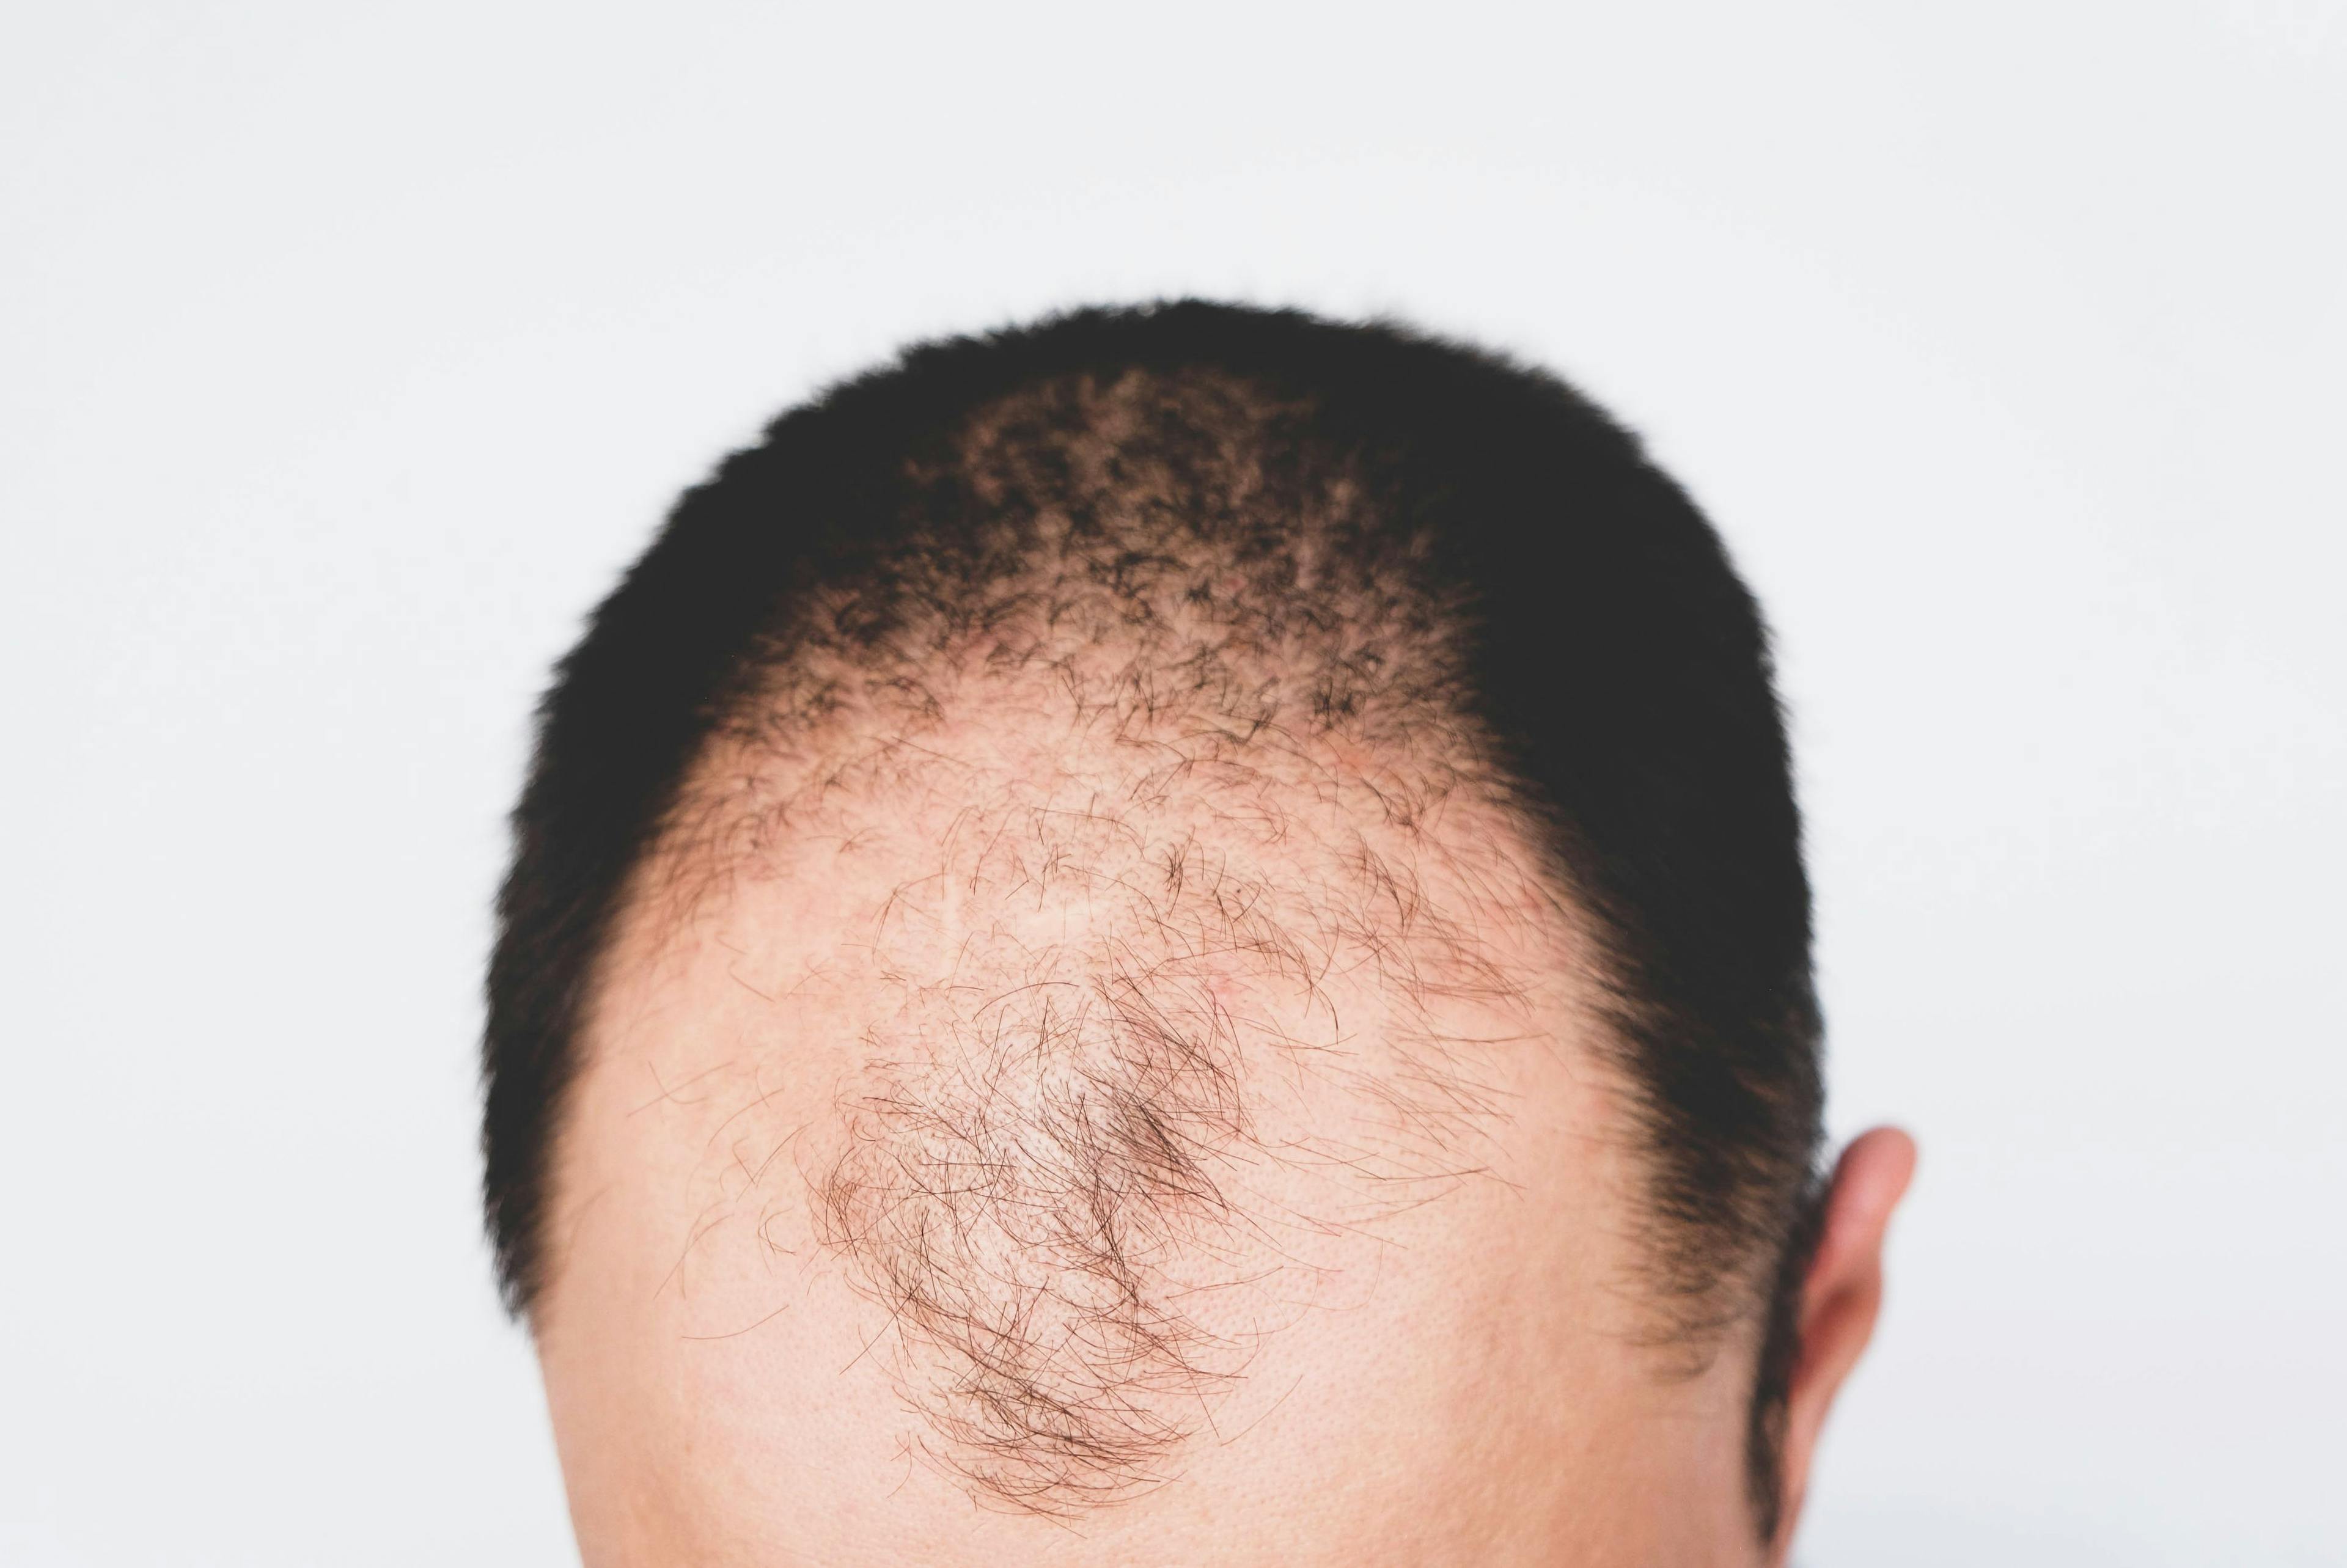 Finasteride and Hydroxychloroquine Deemed Equally Effective in Treatment of Frontal Fibrosing Alopecia